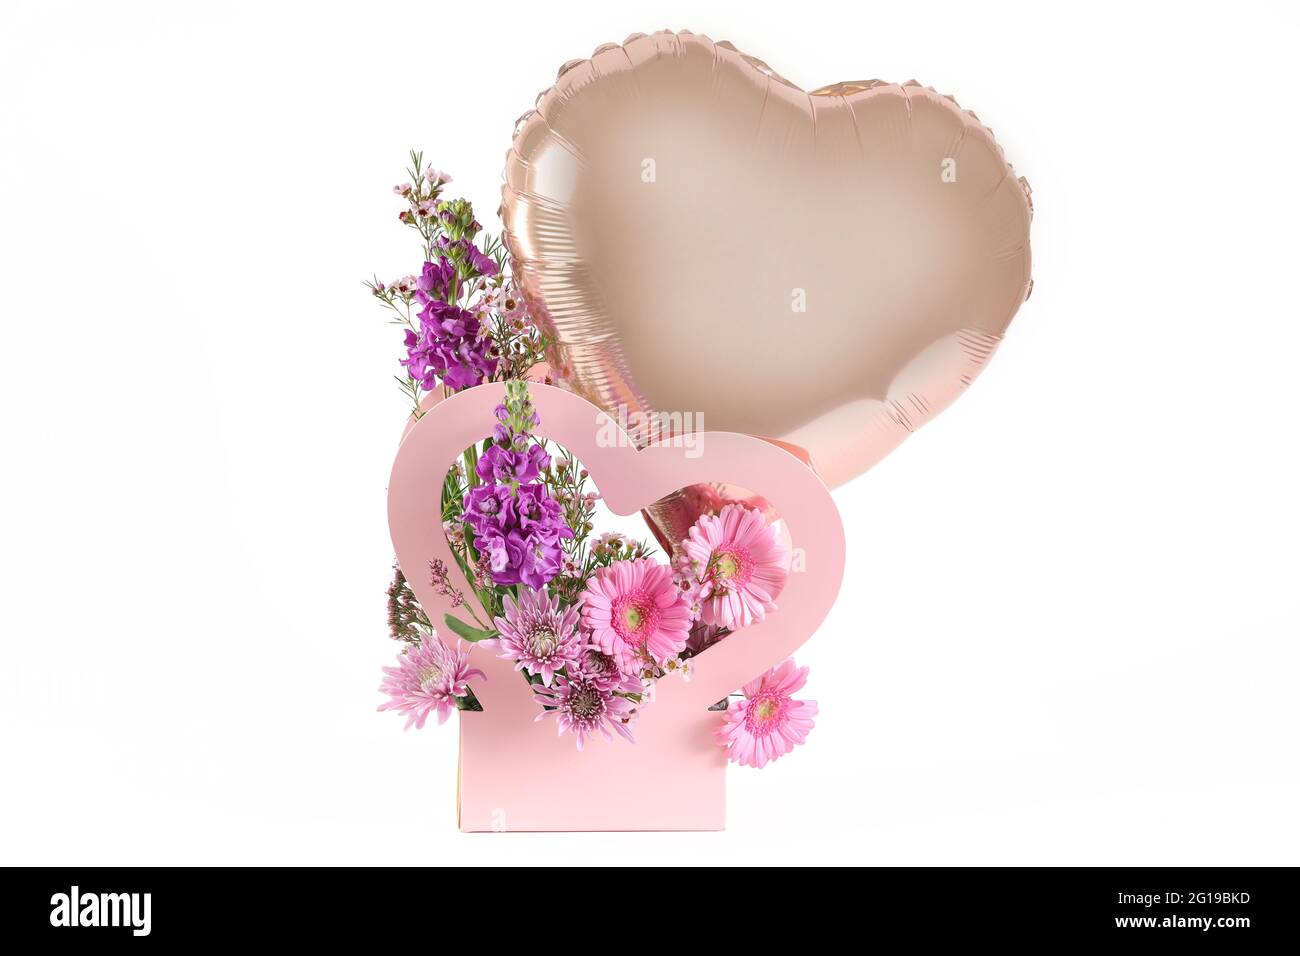 Flower bouquet with balloon and place for text. Stock Photo